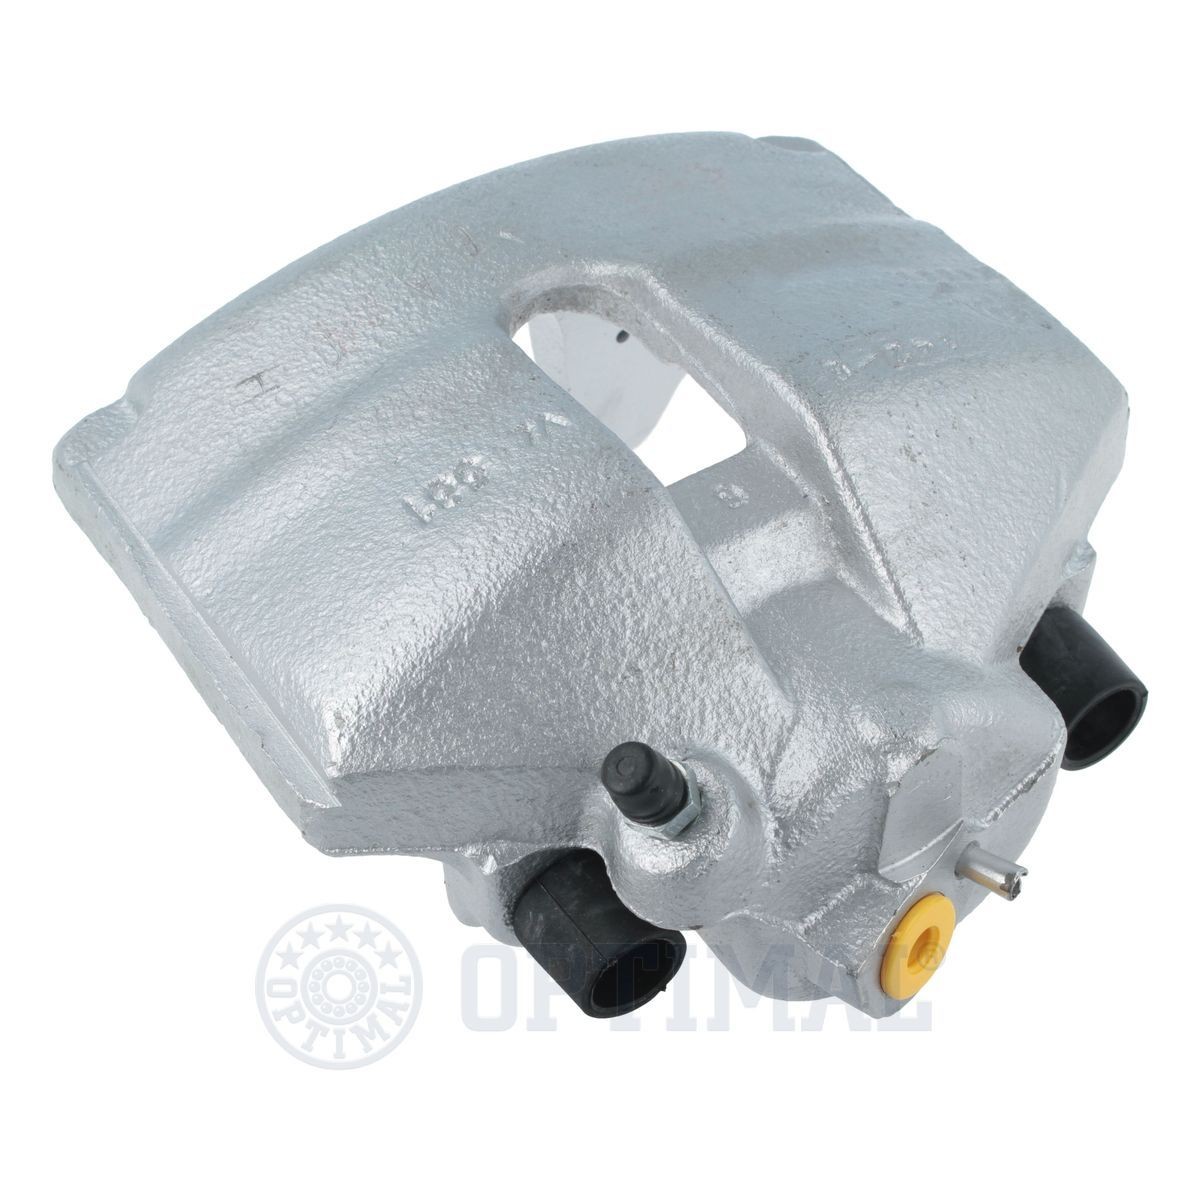 OPTIMAL BC-1004L Brake caliper Grey Cast Iron, Front Axle Left, without holding frame